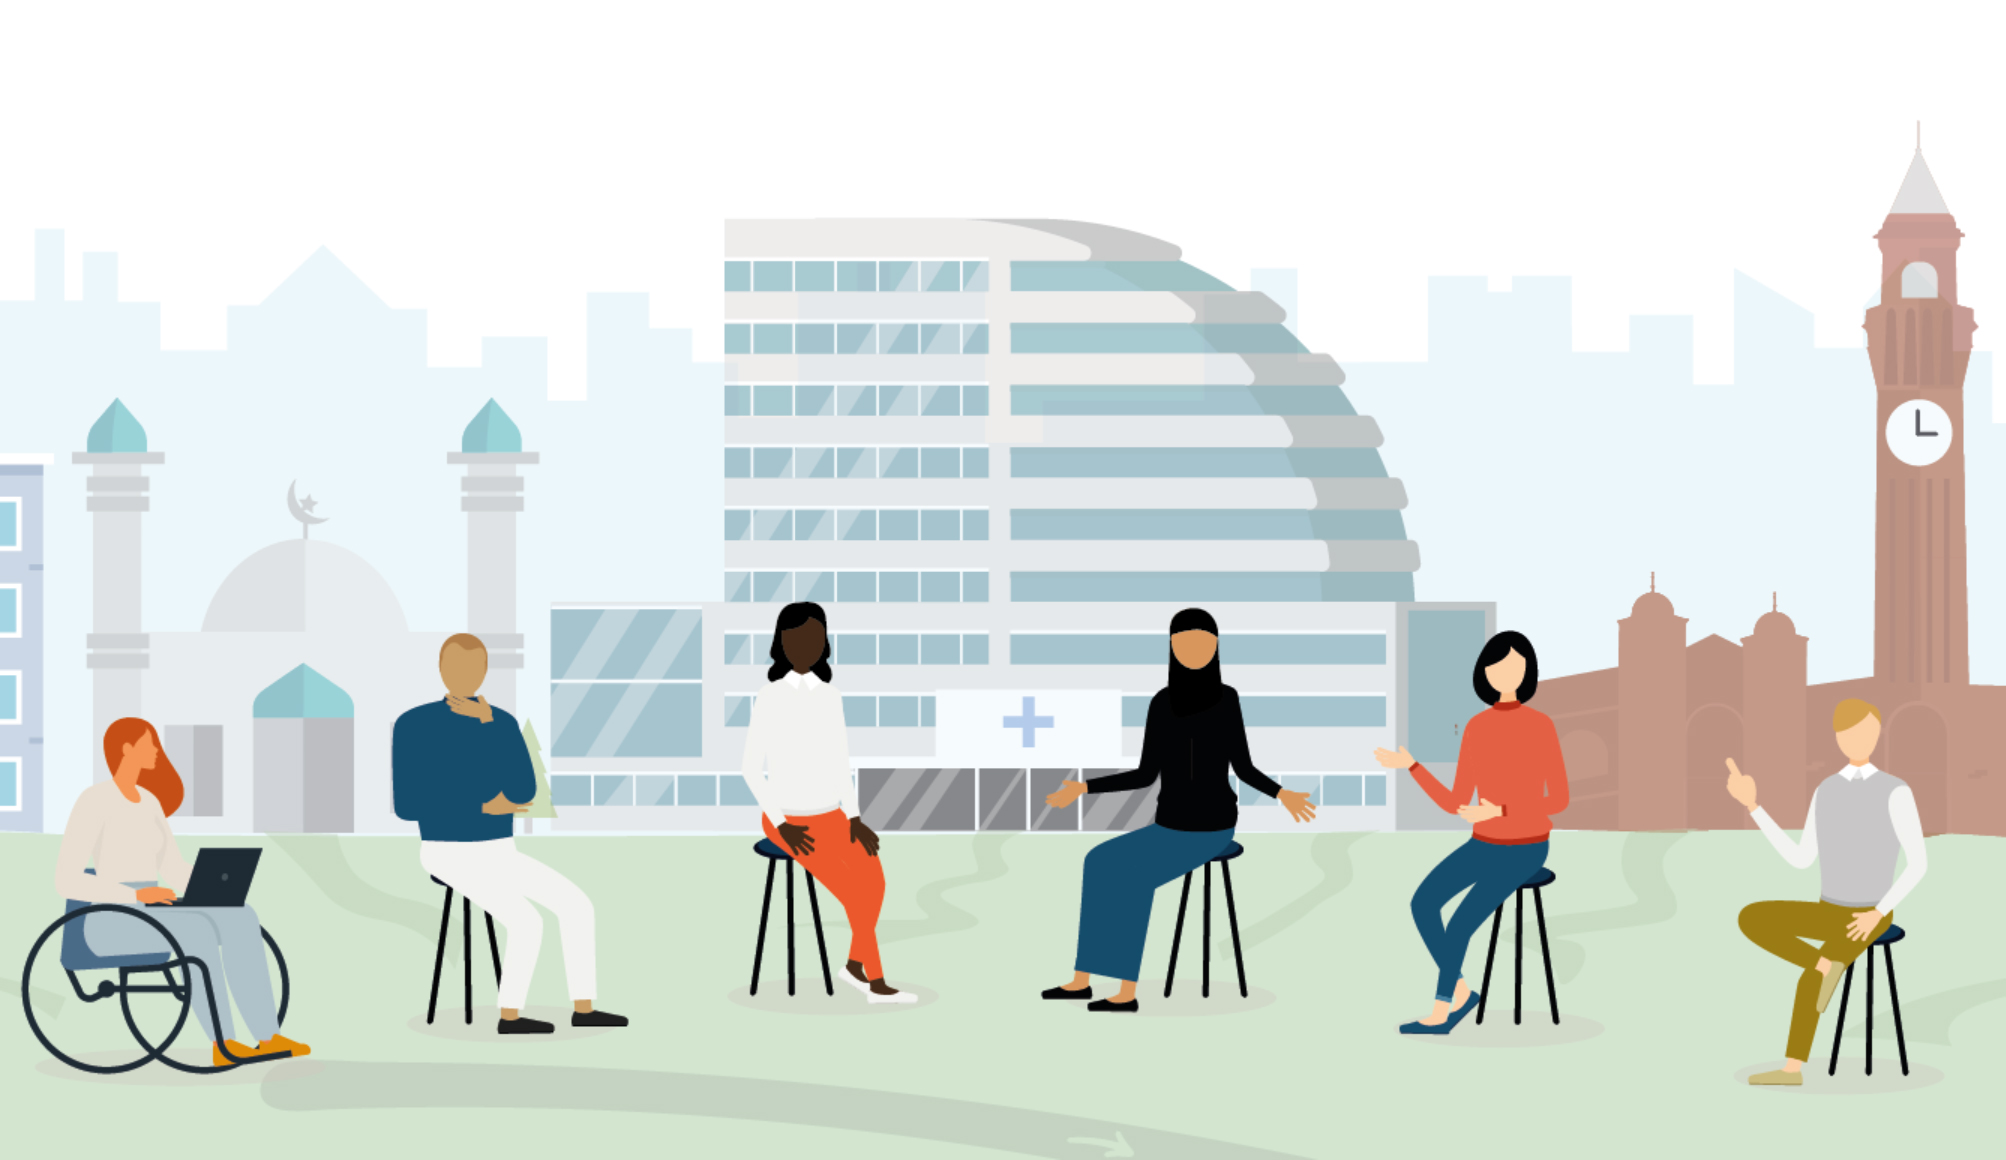 Graphic image with a diverse group of people sitting in front of the skyline of Birmingham, with the University of Birmingham's clock tower and the Queen Elizabeth Hospital as the most prominent buildings